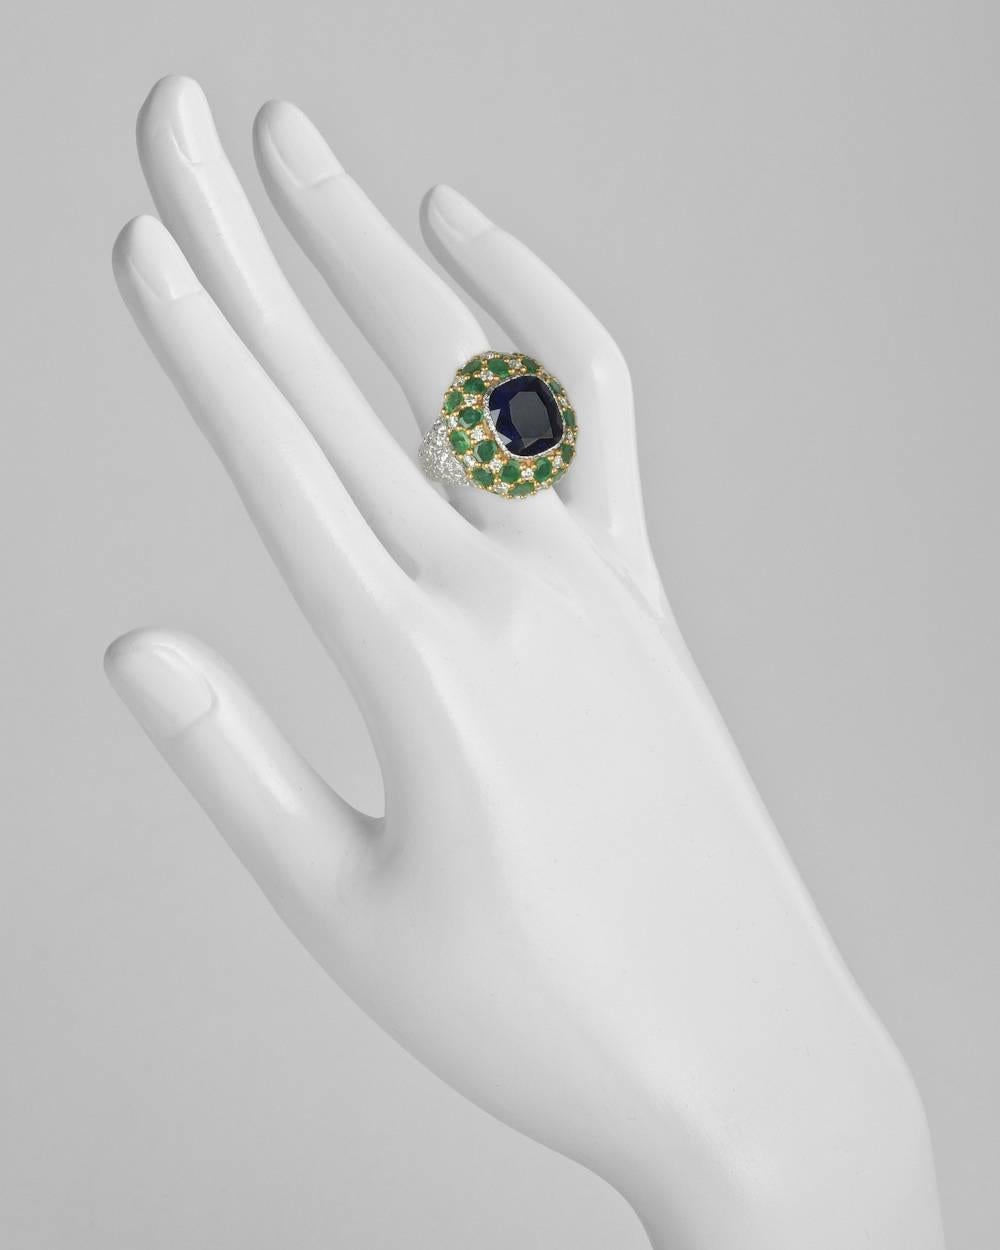 Cocktail ring, centering a cushion-shaped natural sapphire within a bombé-style mount of pavé-set emeralds and diamonds, in a textured 18k white gold setting with 18k yellow gold, signed Buccellati. Sapphire weighing approximately 8.00 carats,